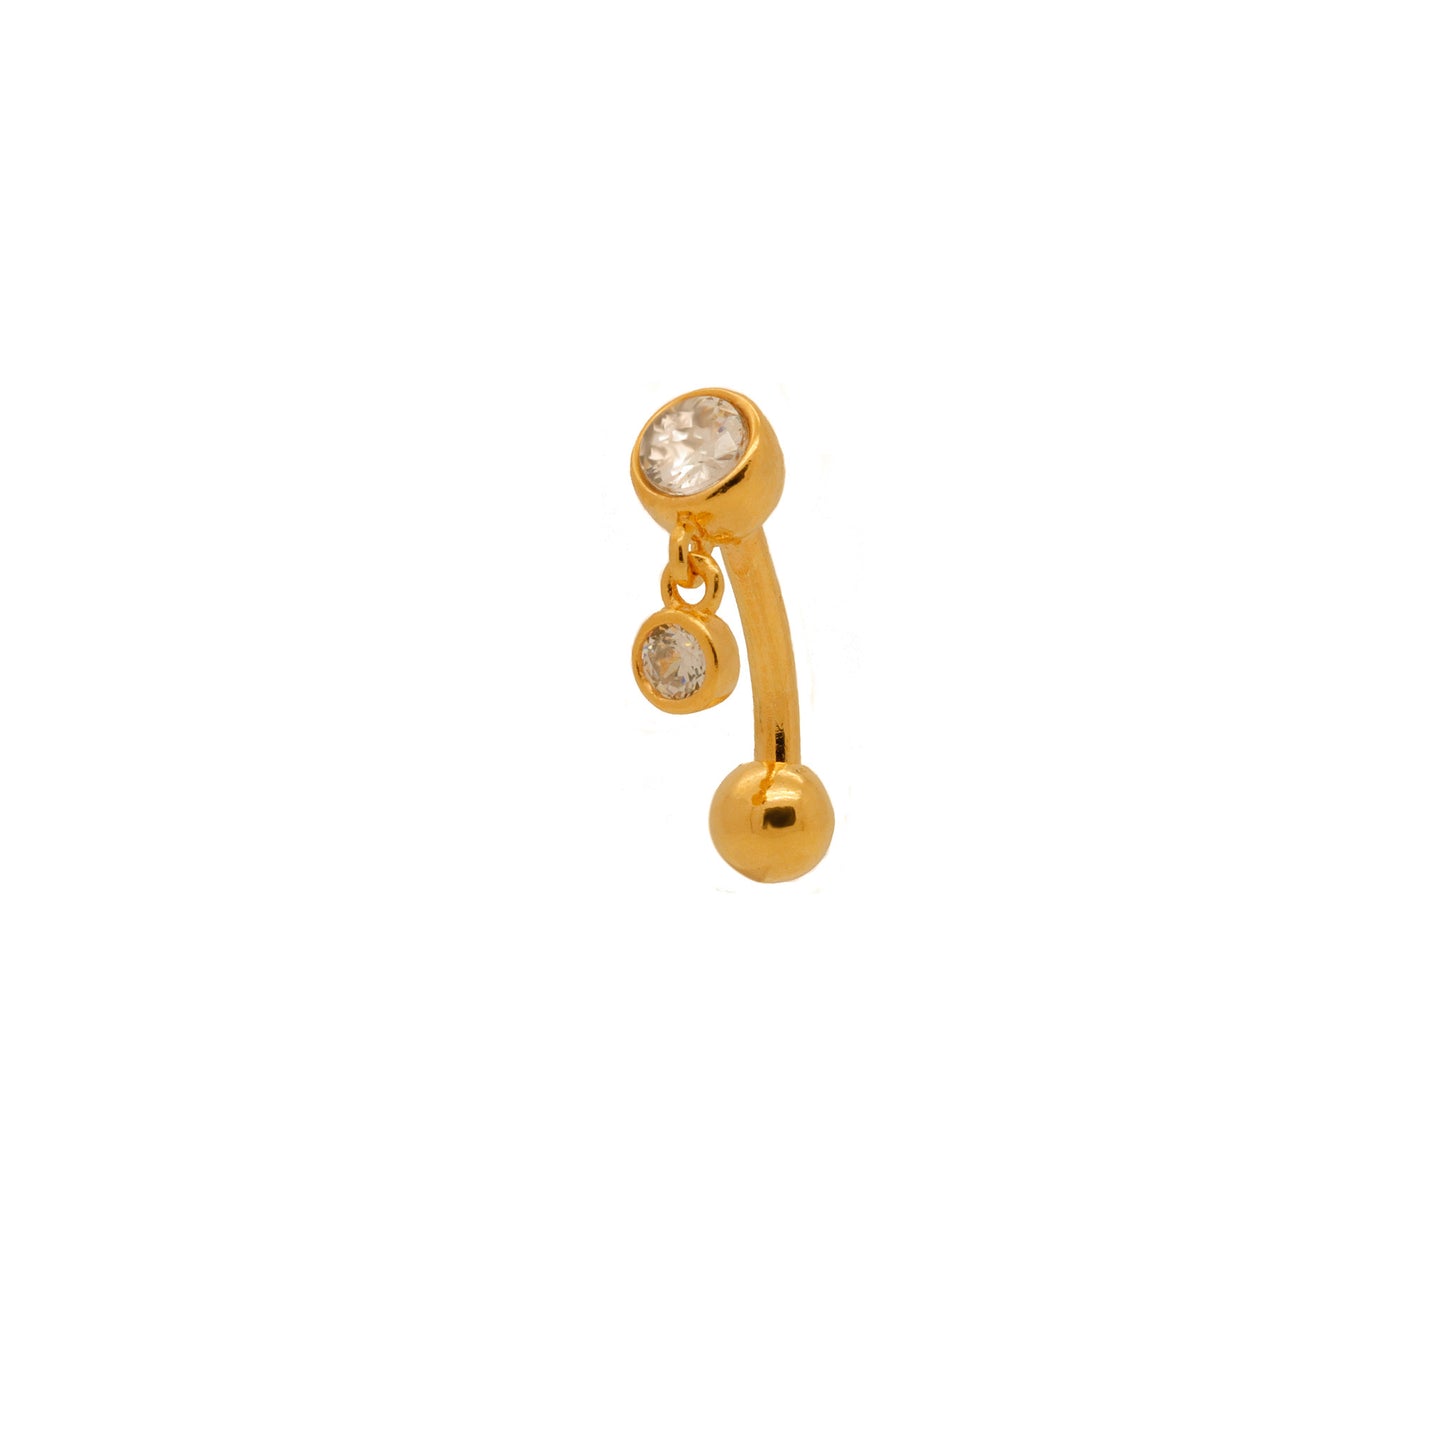 Vermeil | 925 Silver 24k Gold Coated 16G 14G Petite Charm Dangle Reverse Belly Ring | 6mm 1/4" 8mm 5/16" 10mm 3/8" - Sturdy South